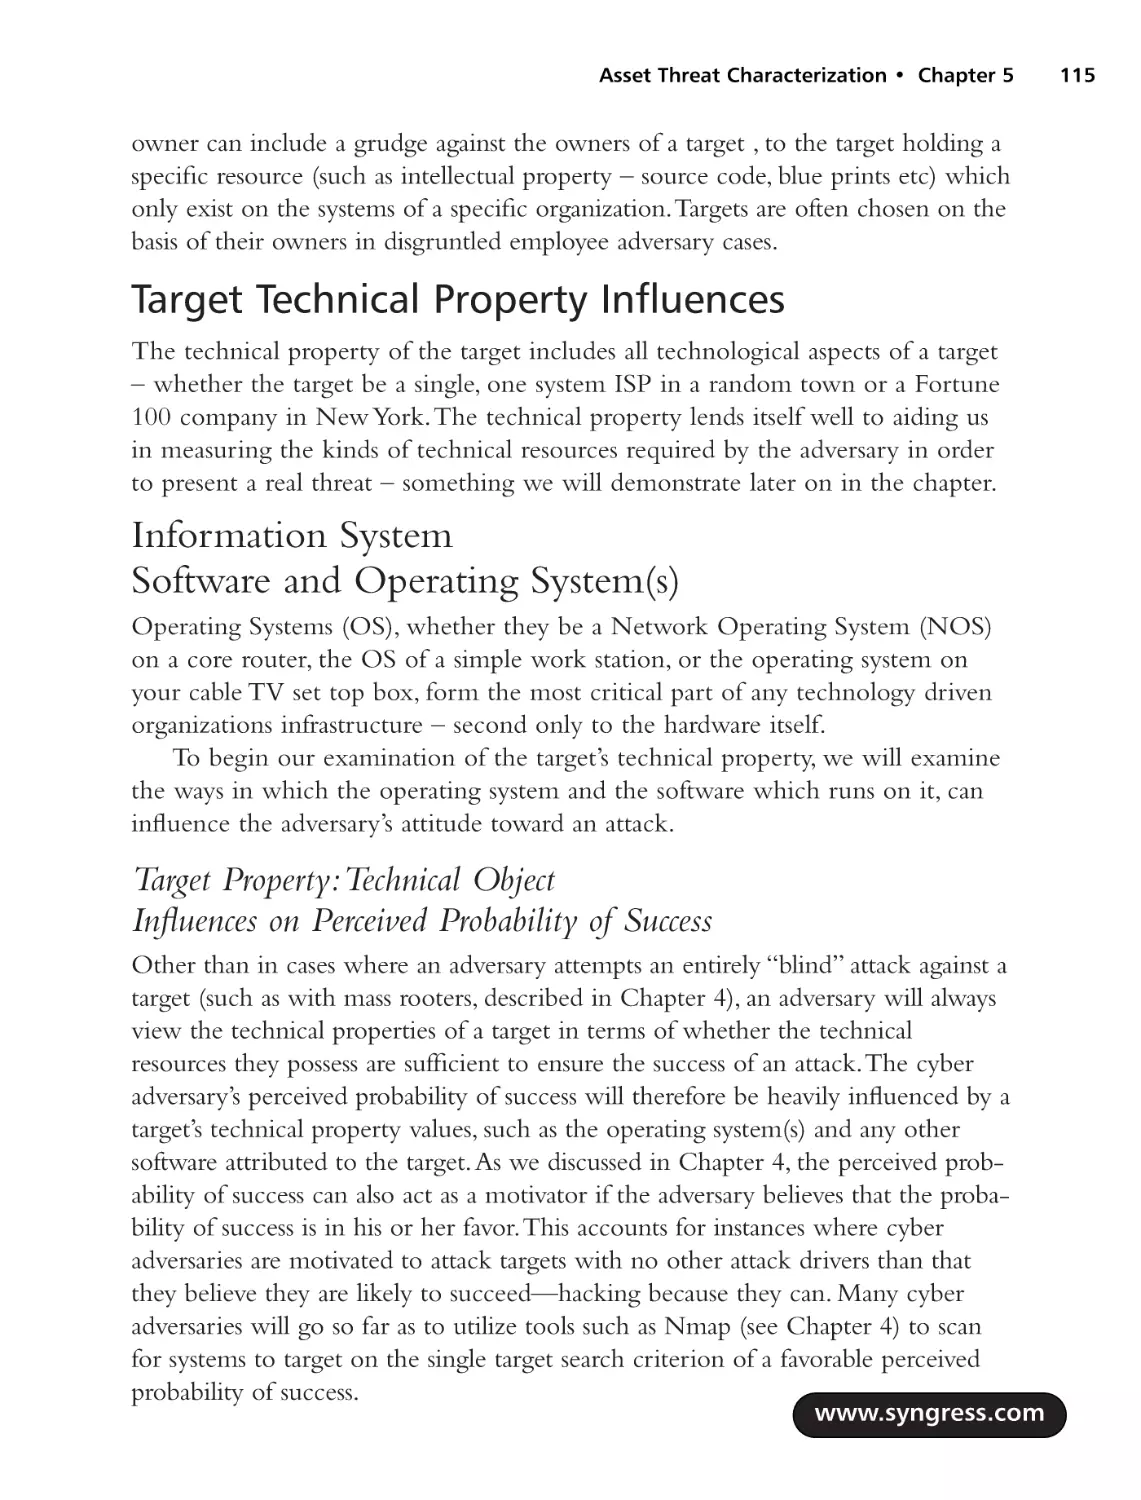 Target Technical Property Influences
Information System Software and Operating System(s)